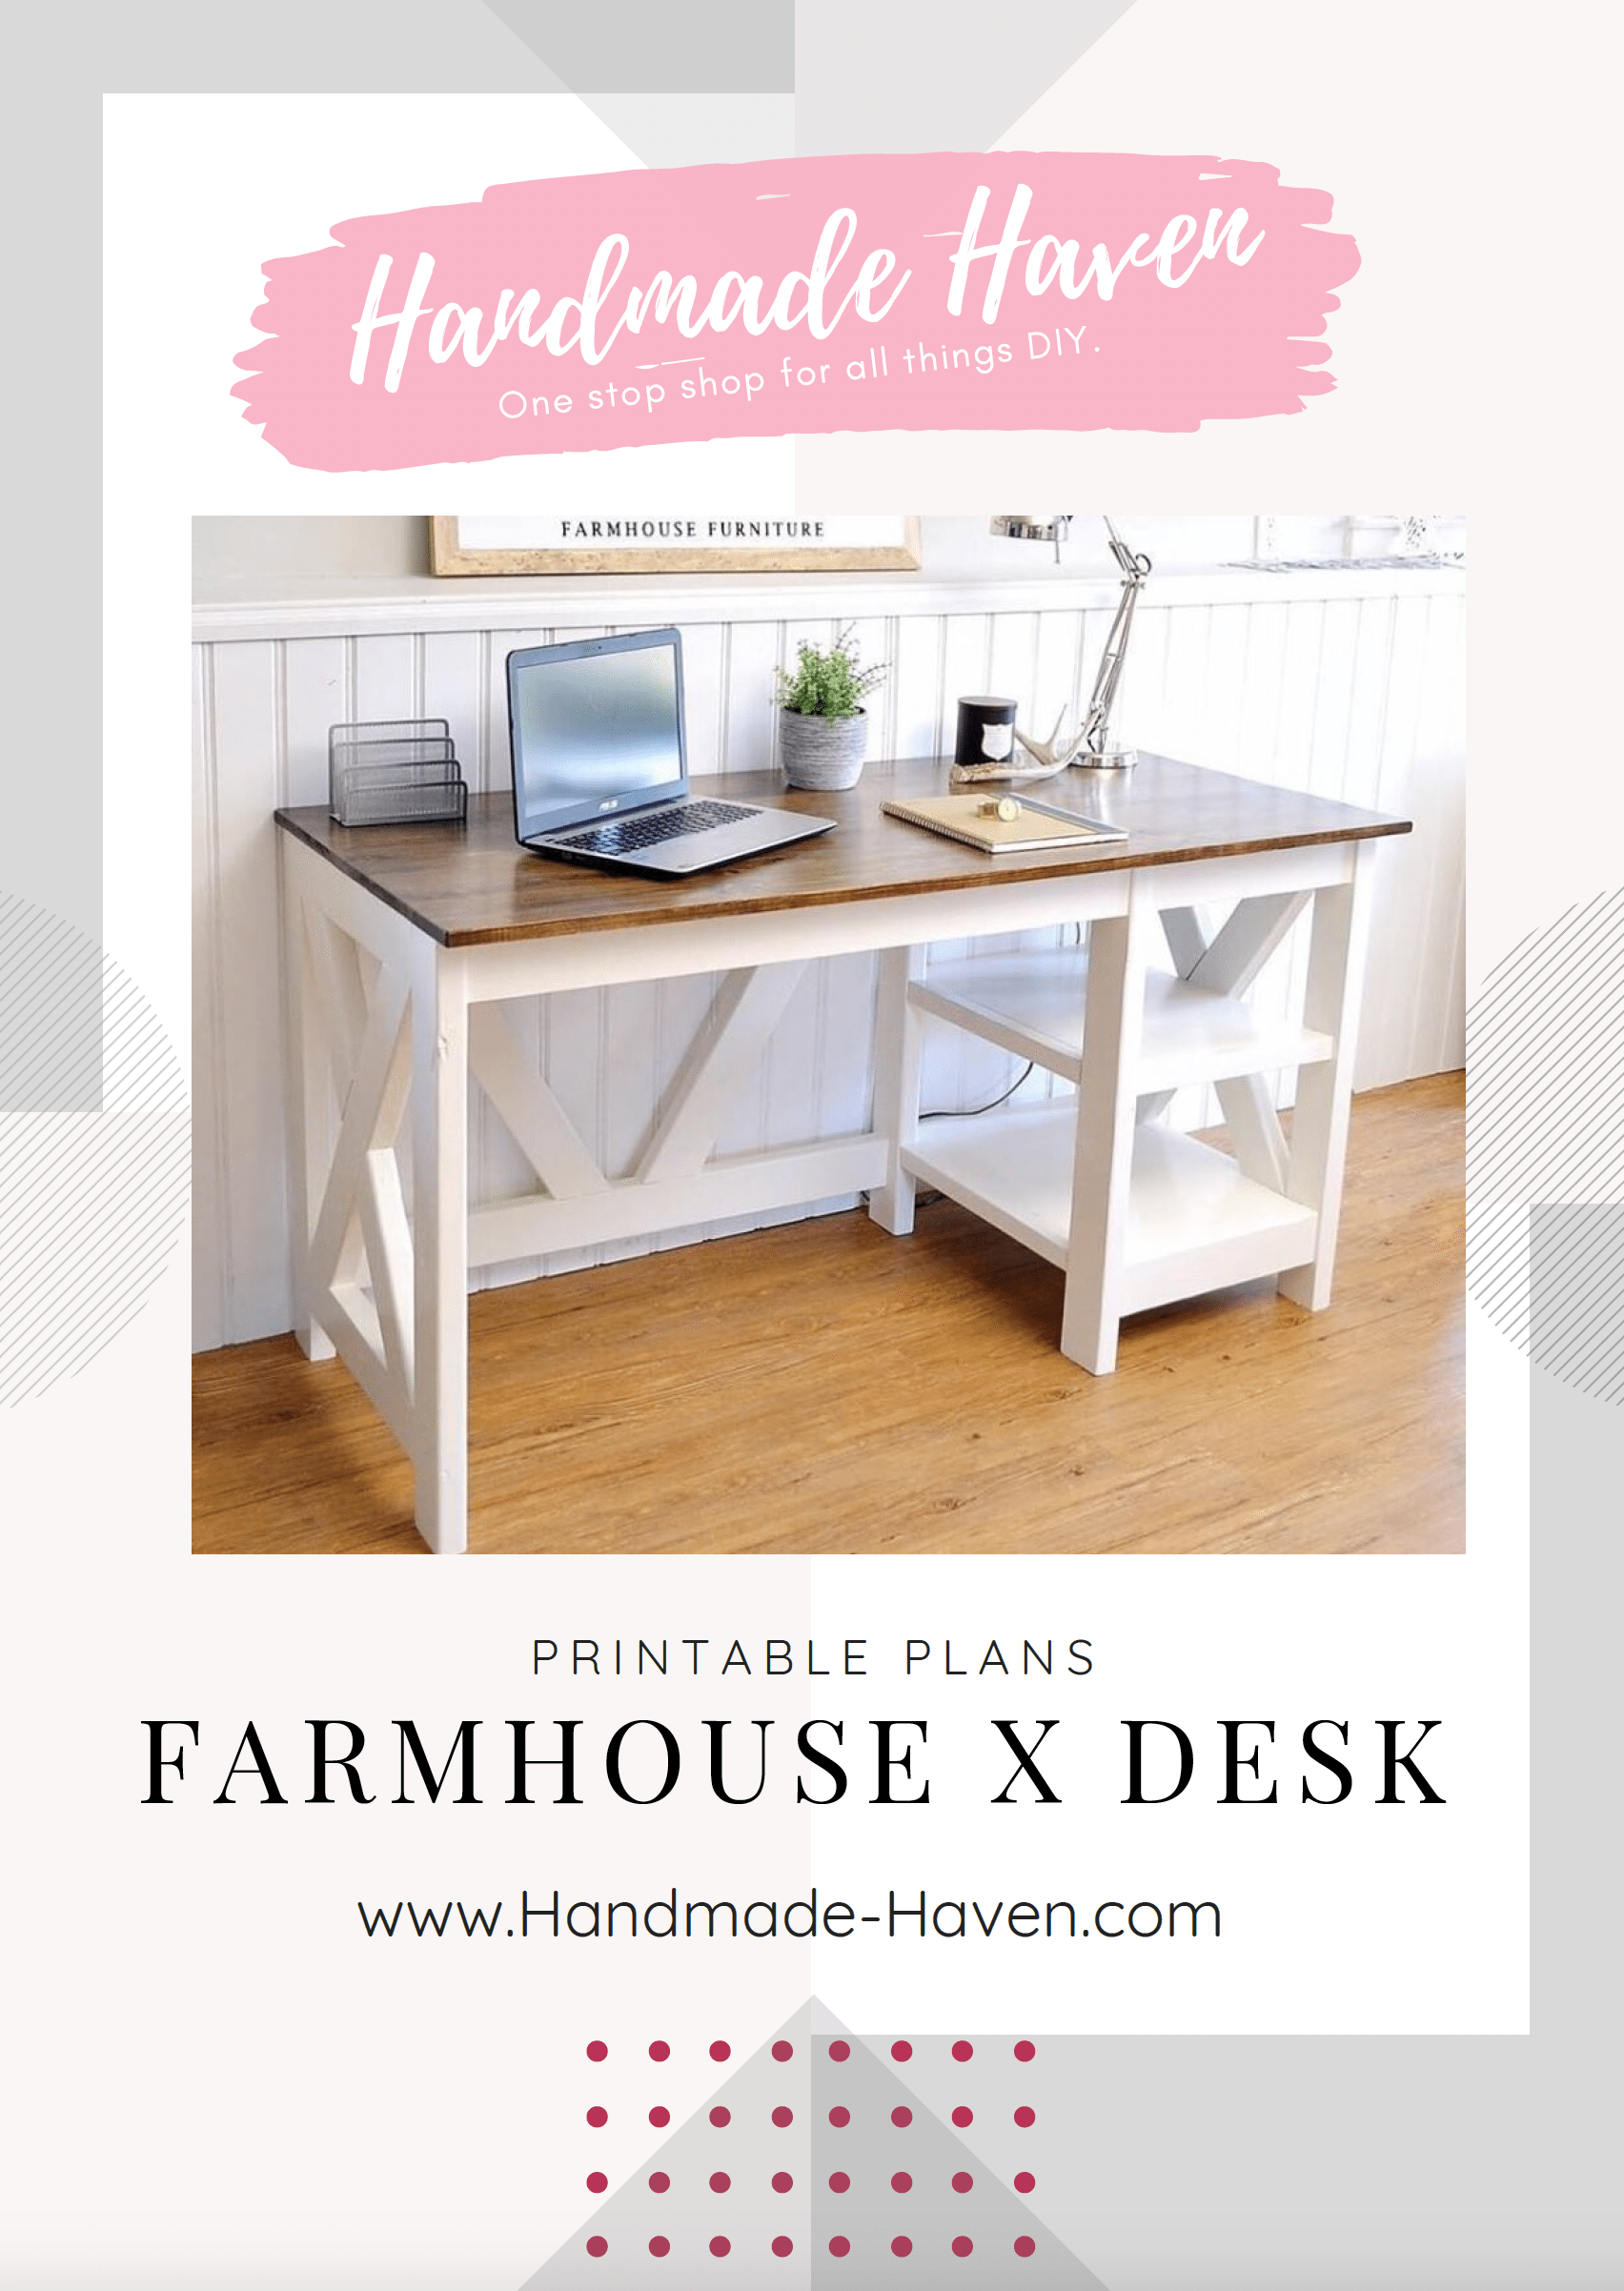 How to Build a Farmhouse Writing Desk - Step by Step Woodworking